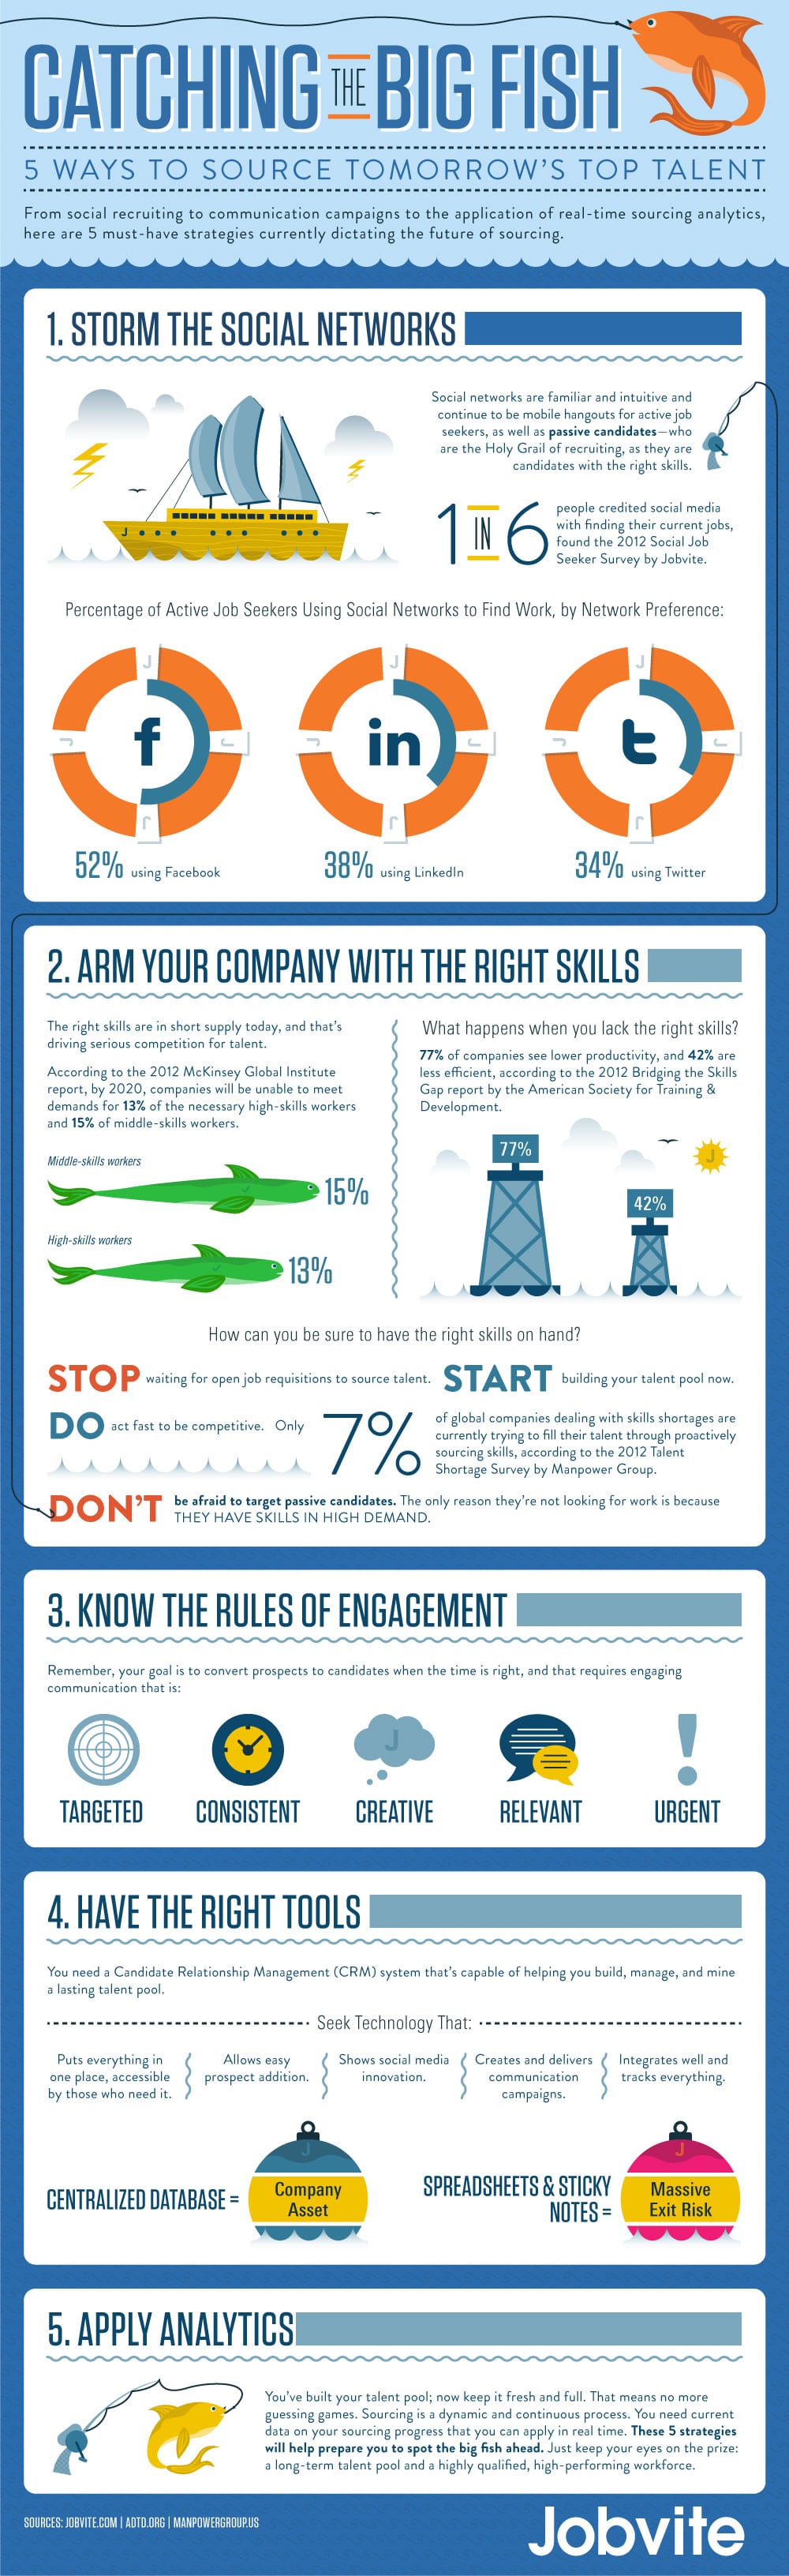 Social Recruiting: How To Find Tomorrow’s Top Talent Now [Infographic]